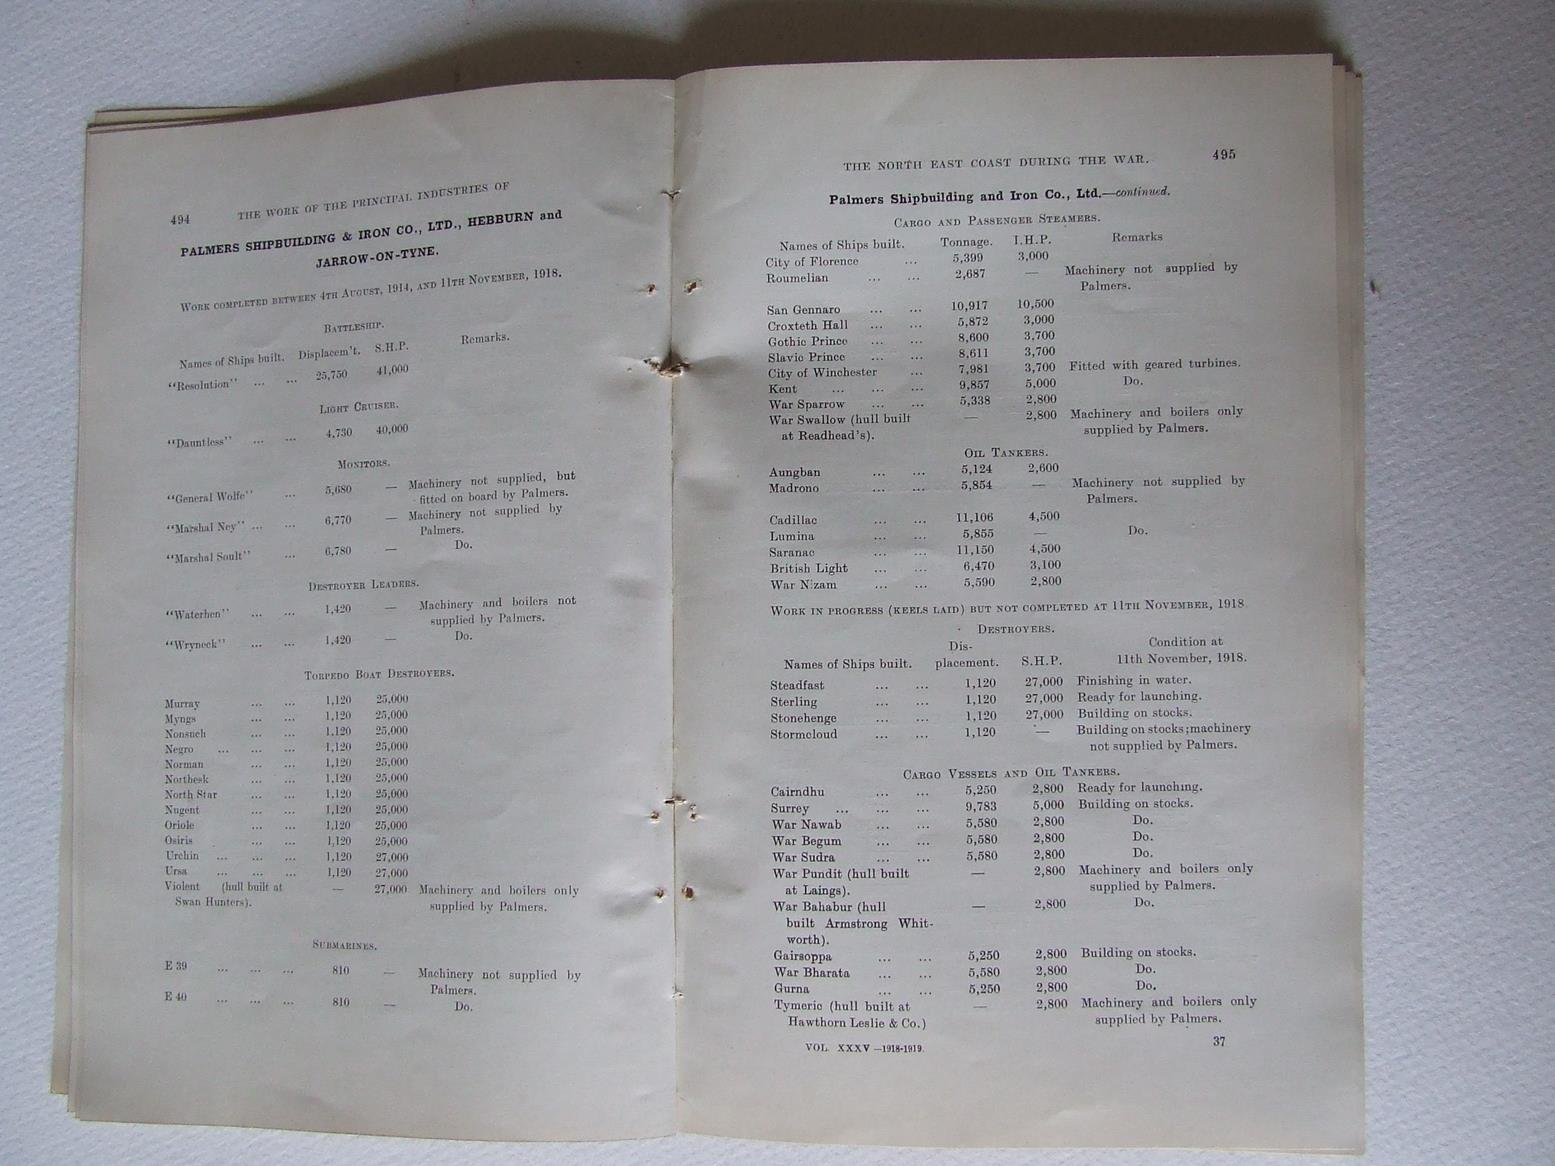 Short Record of the Work of the Principal Industries of the North East Coast during the War [world war one]